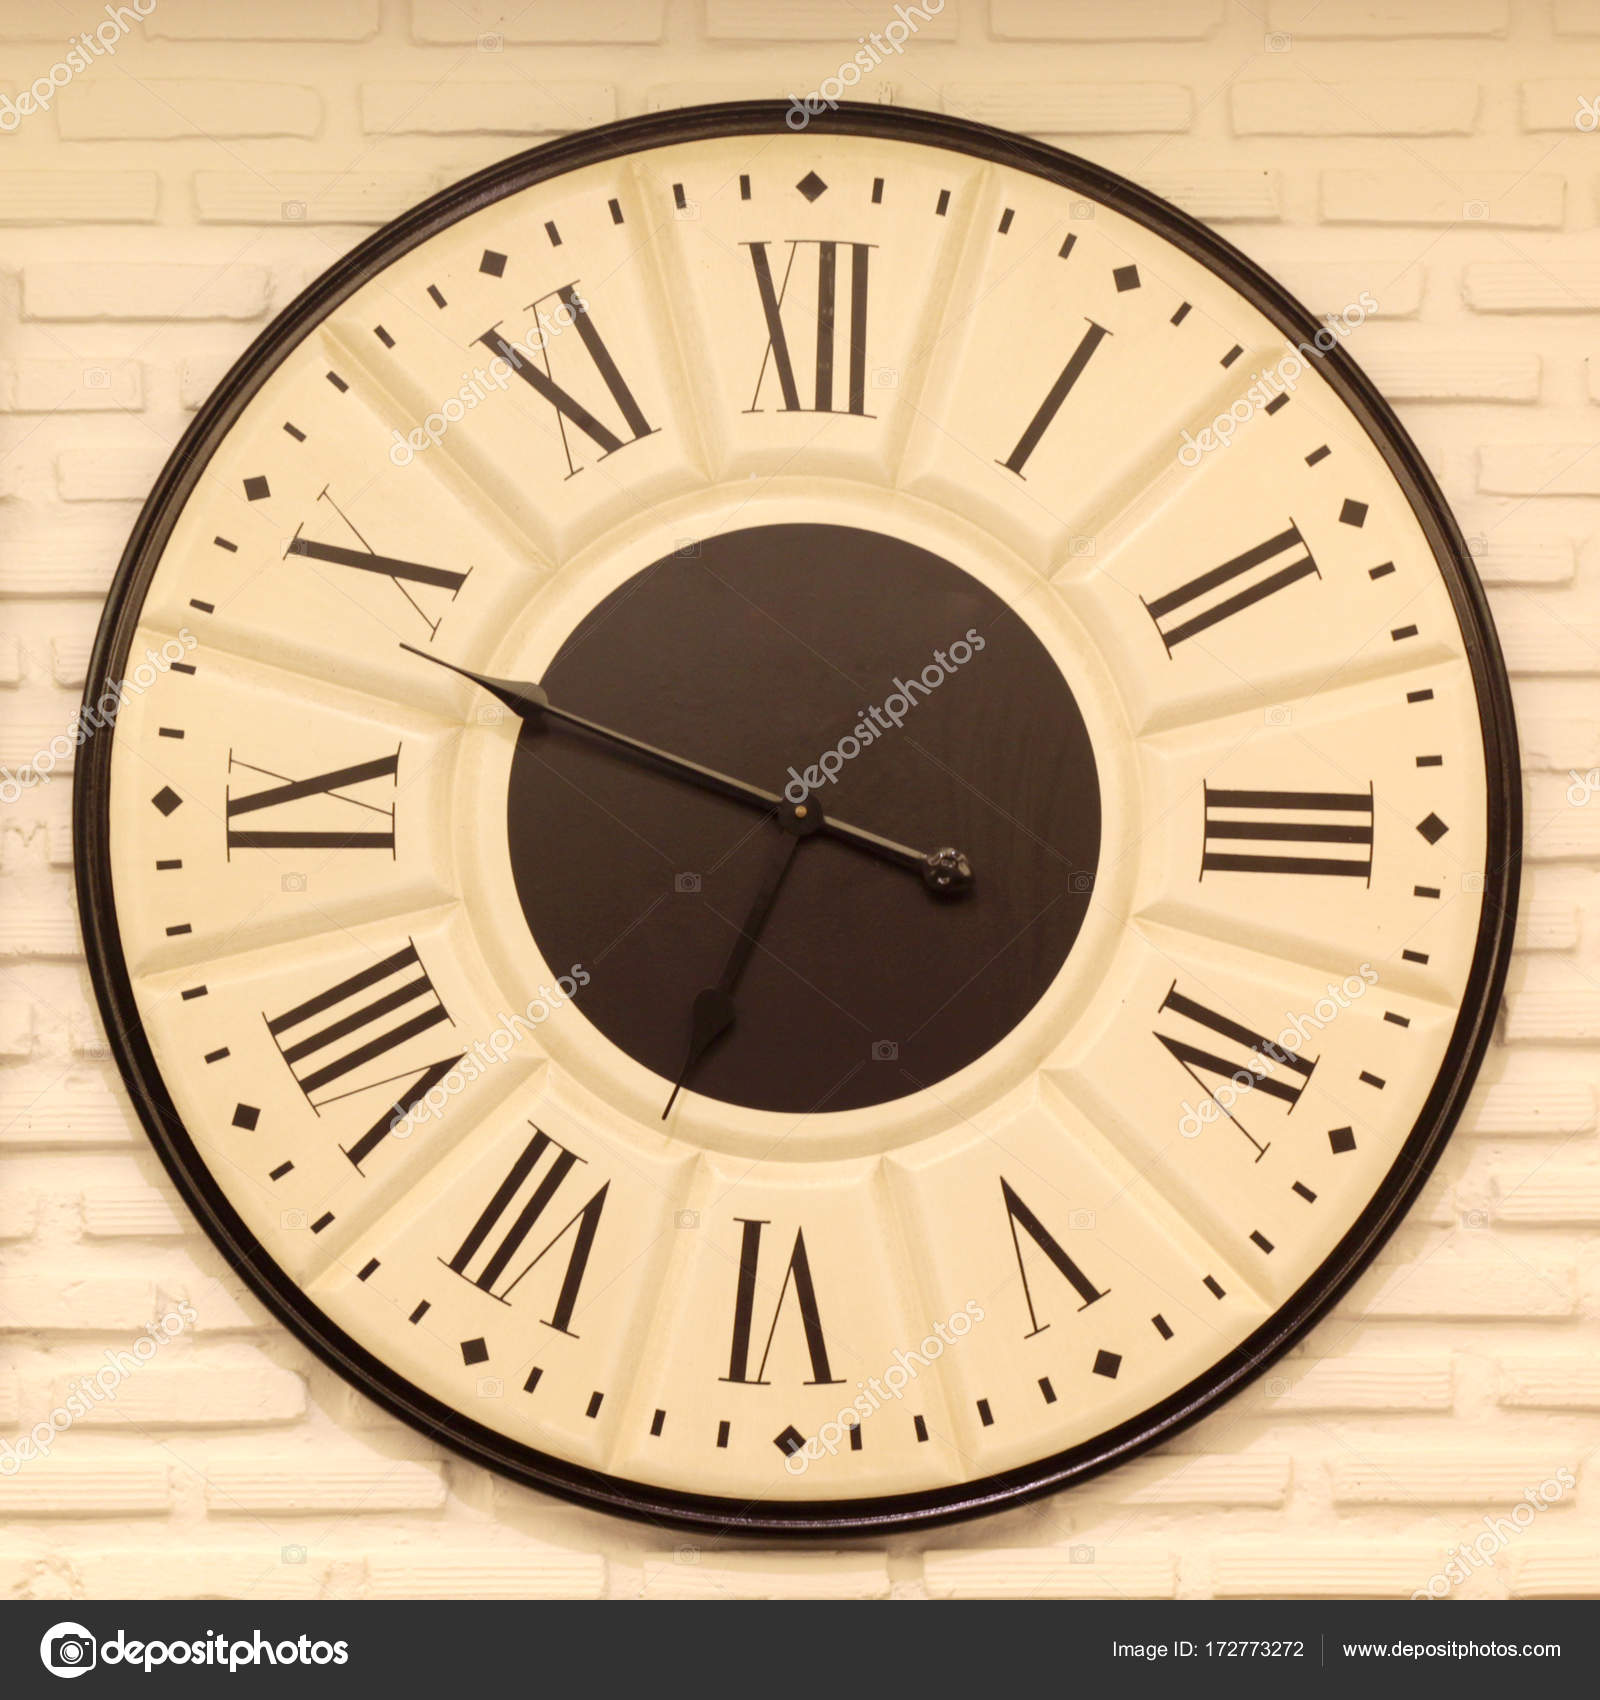 old clock with roman numerals — Stock Photo © leisuretime13 #172773272